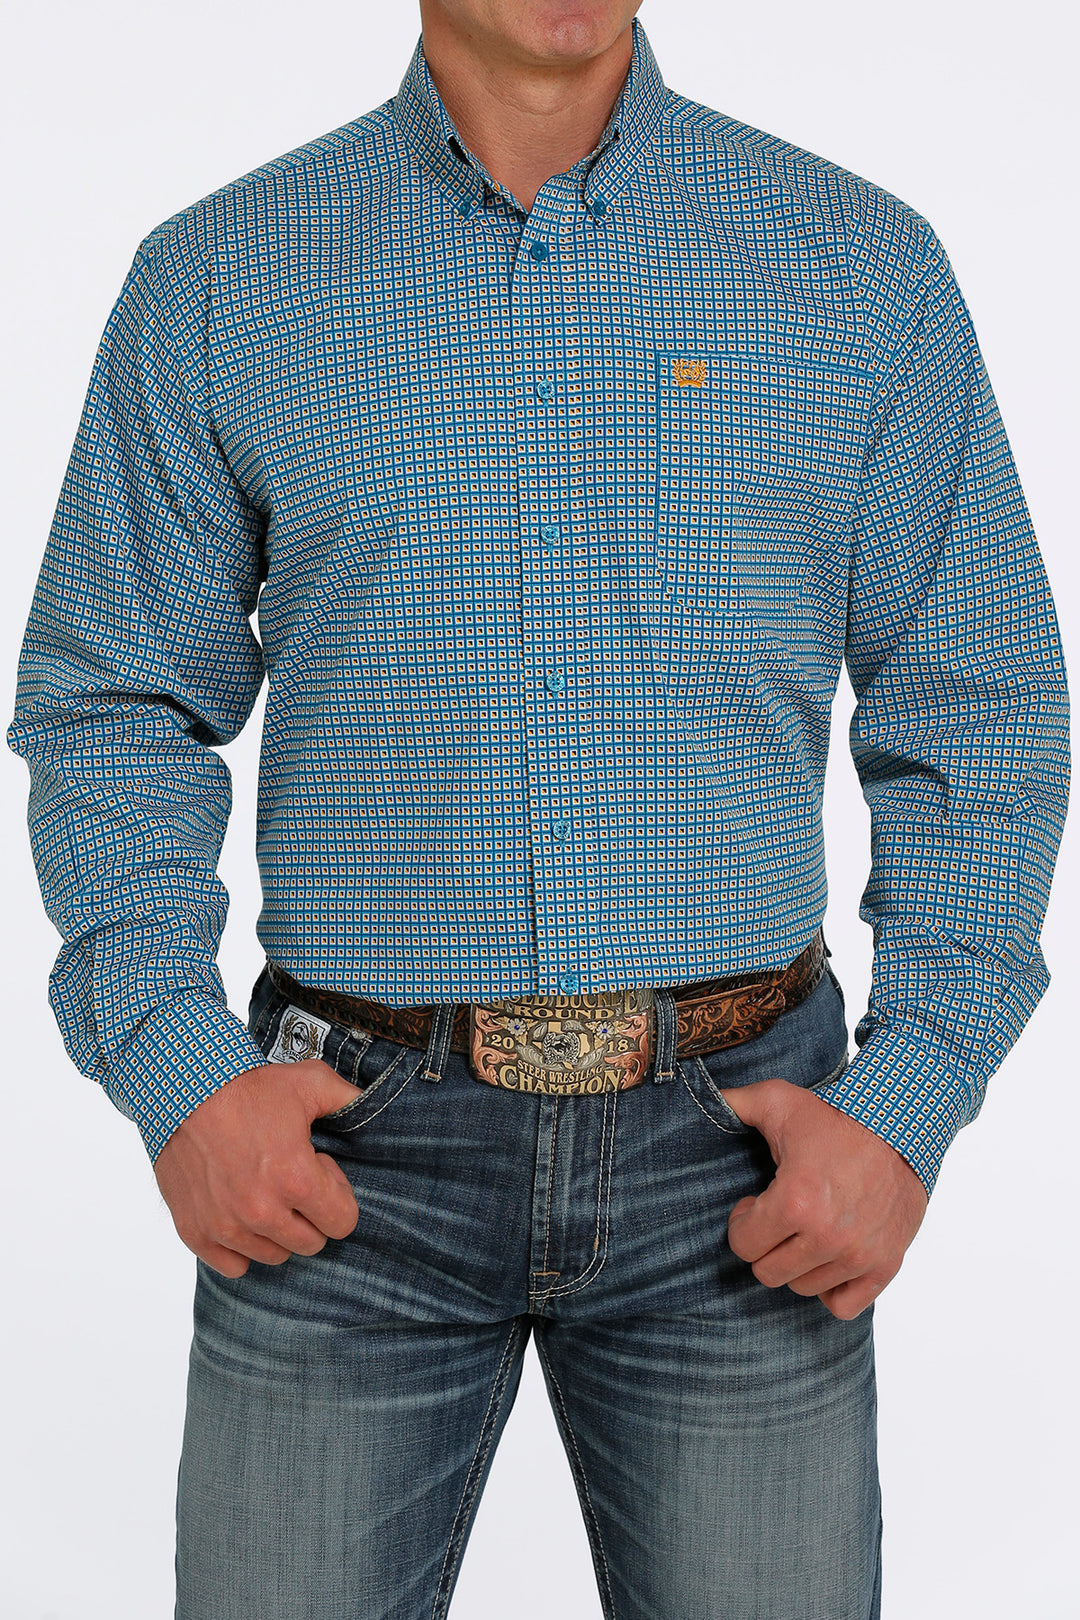 Bright Turquoise Men's Cinch Long Sleeve Shirts